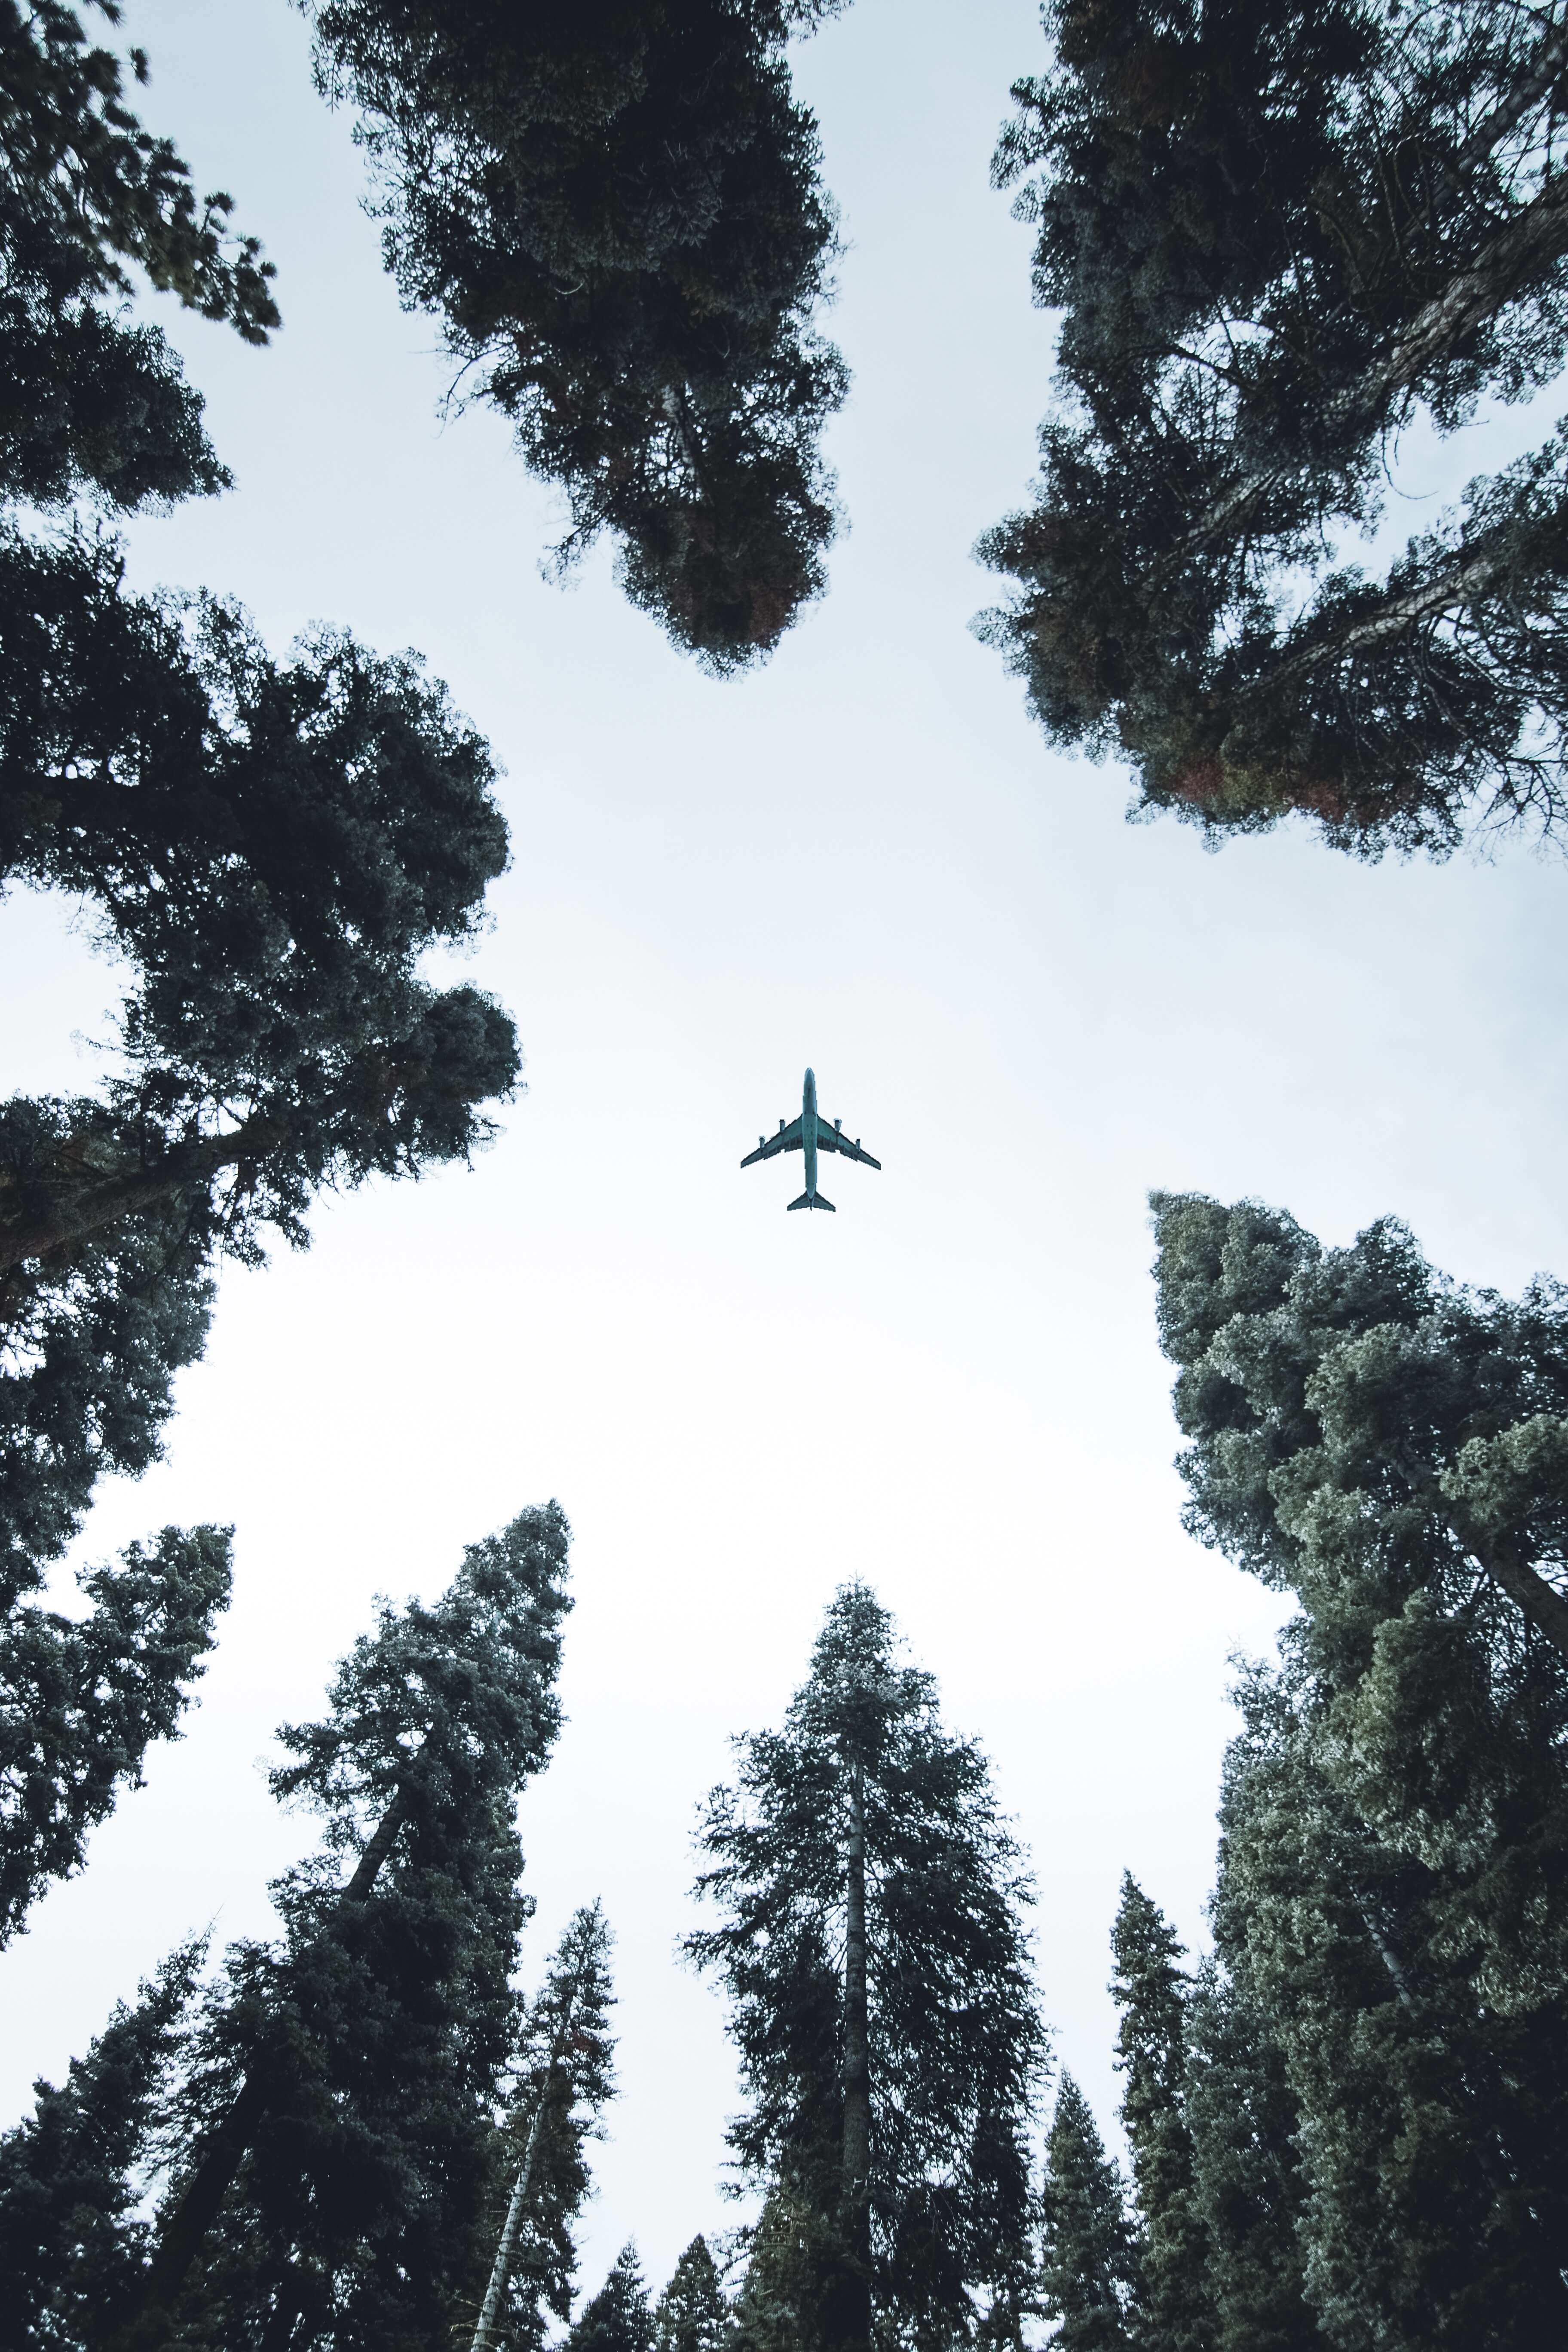 Overhead view of an airplane flying across a forest with the trees pointing up toward the sky.